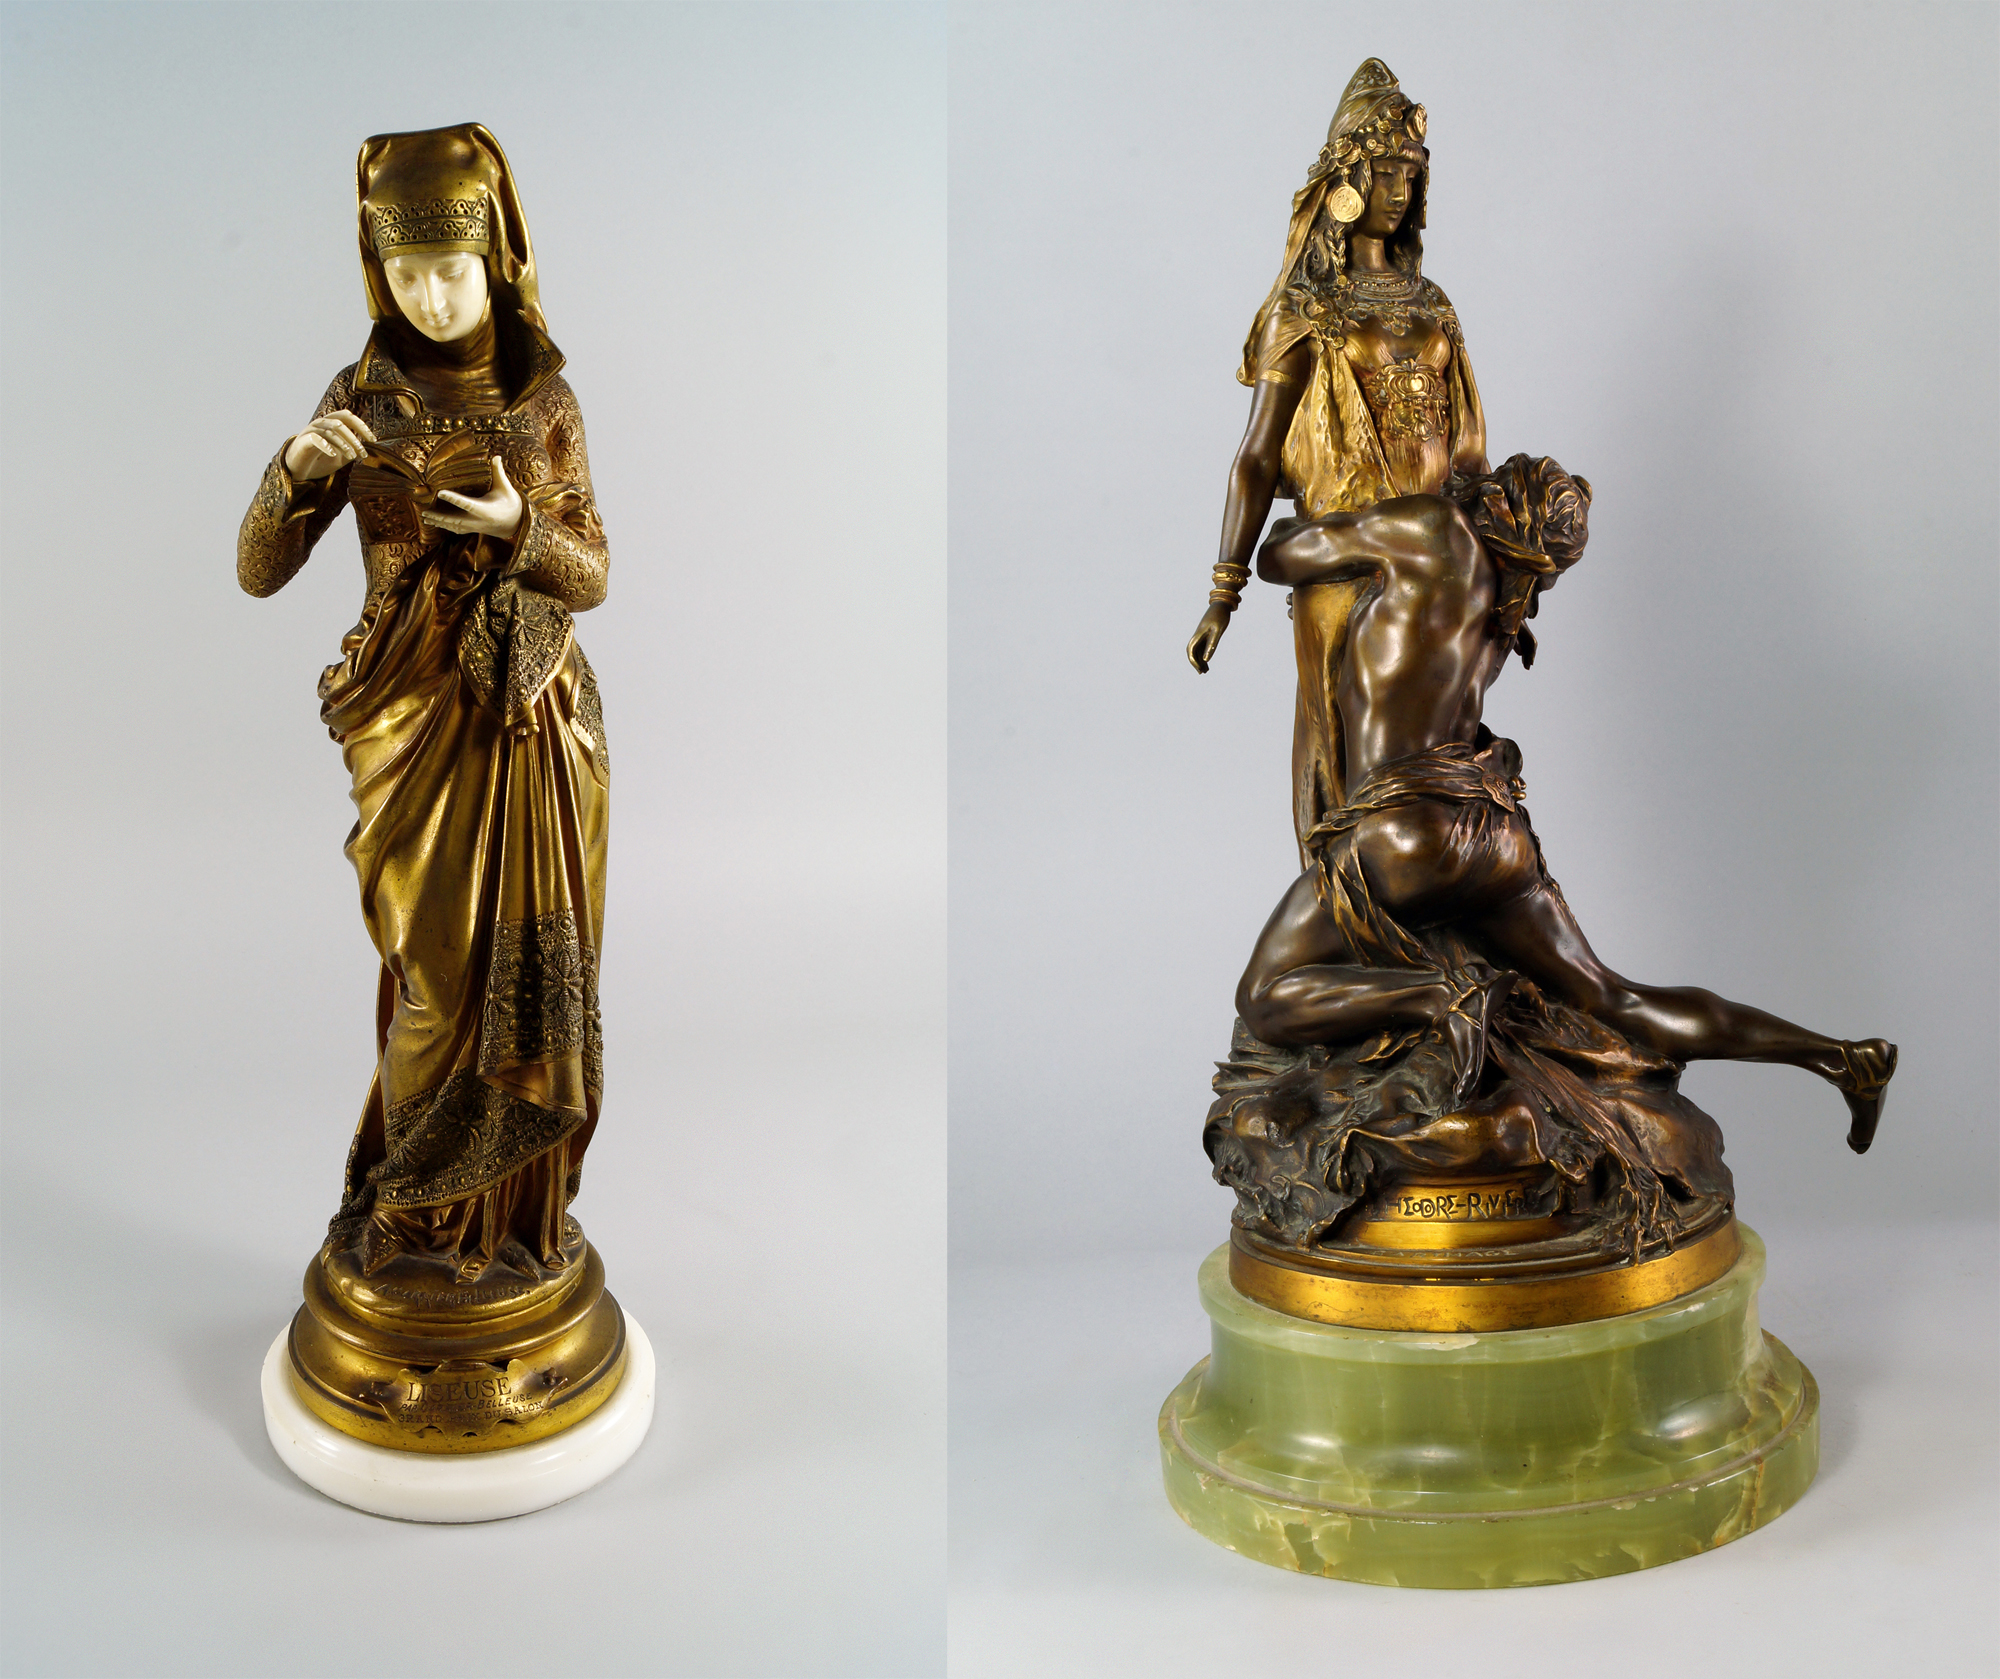 The bronze on the left is by French sculptor Theodore Riviere and sold for £1,968. The one on the right, by Albert Carrier-Belleuse, brought. £1,599. Roseberys images